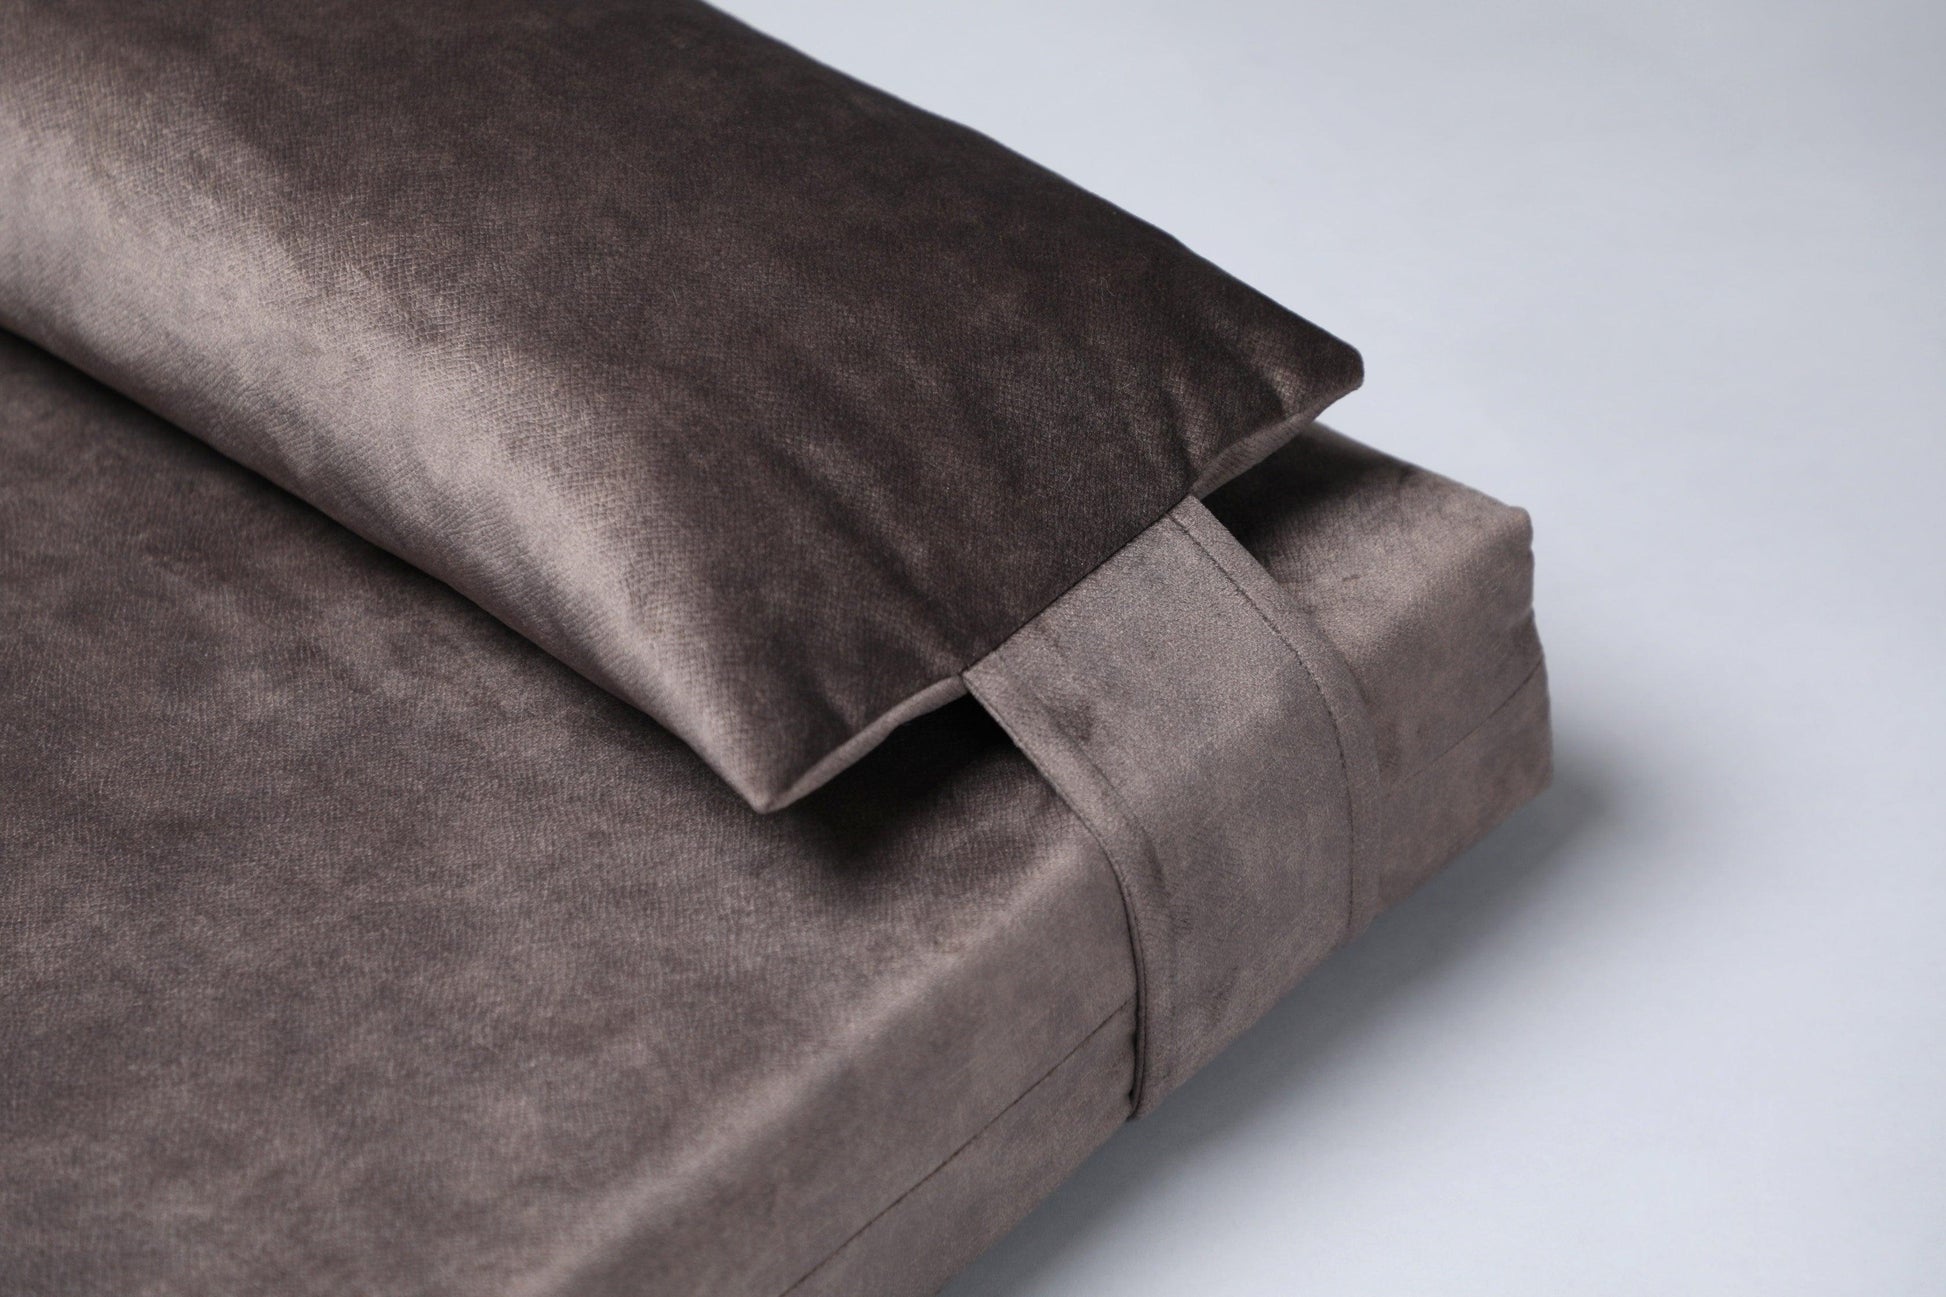 2-sided velvet dog bed. TAUPE - European handmade dog accessories by My Wild Other